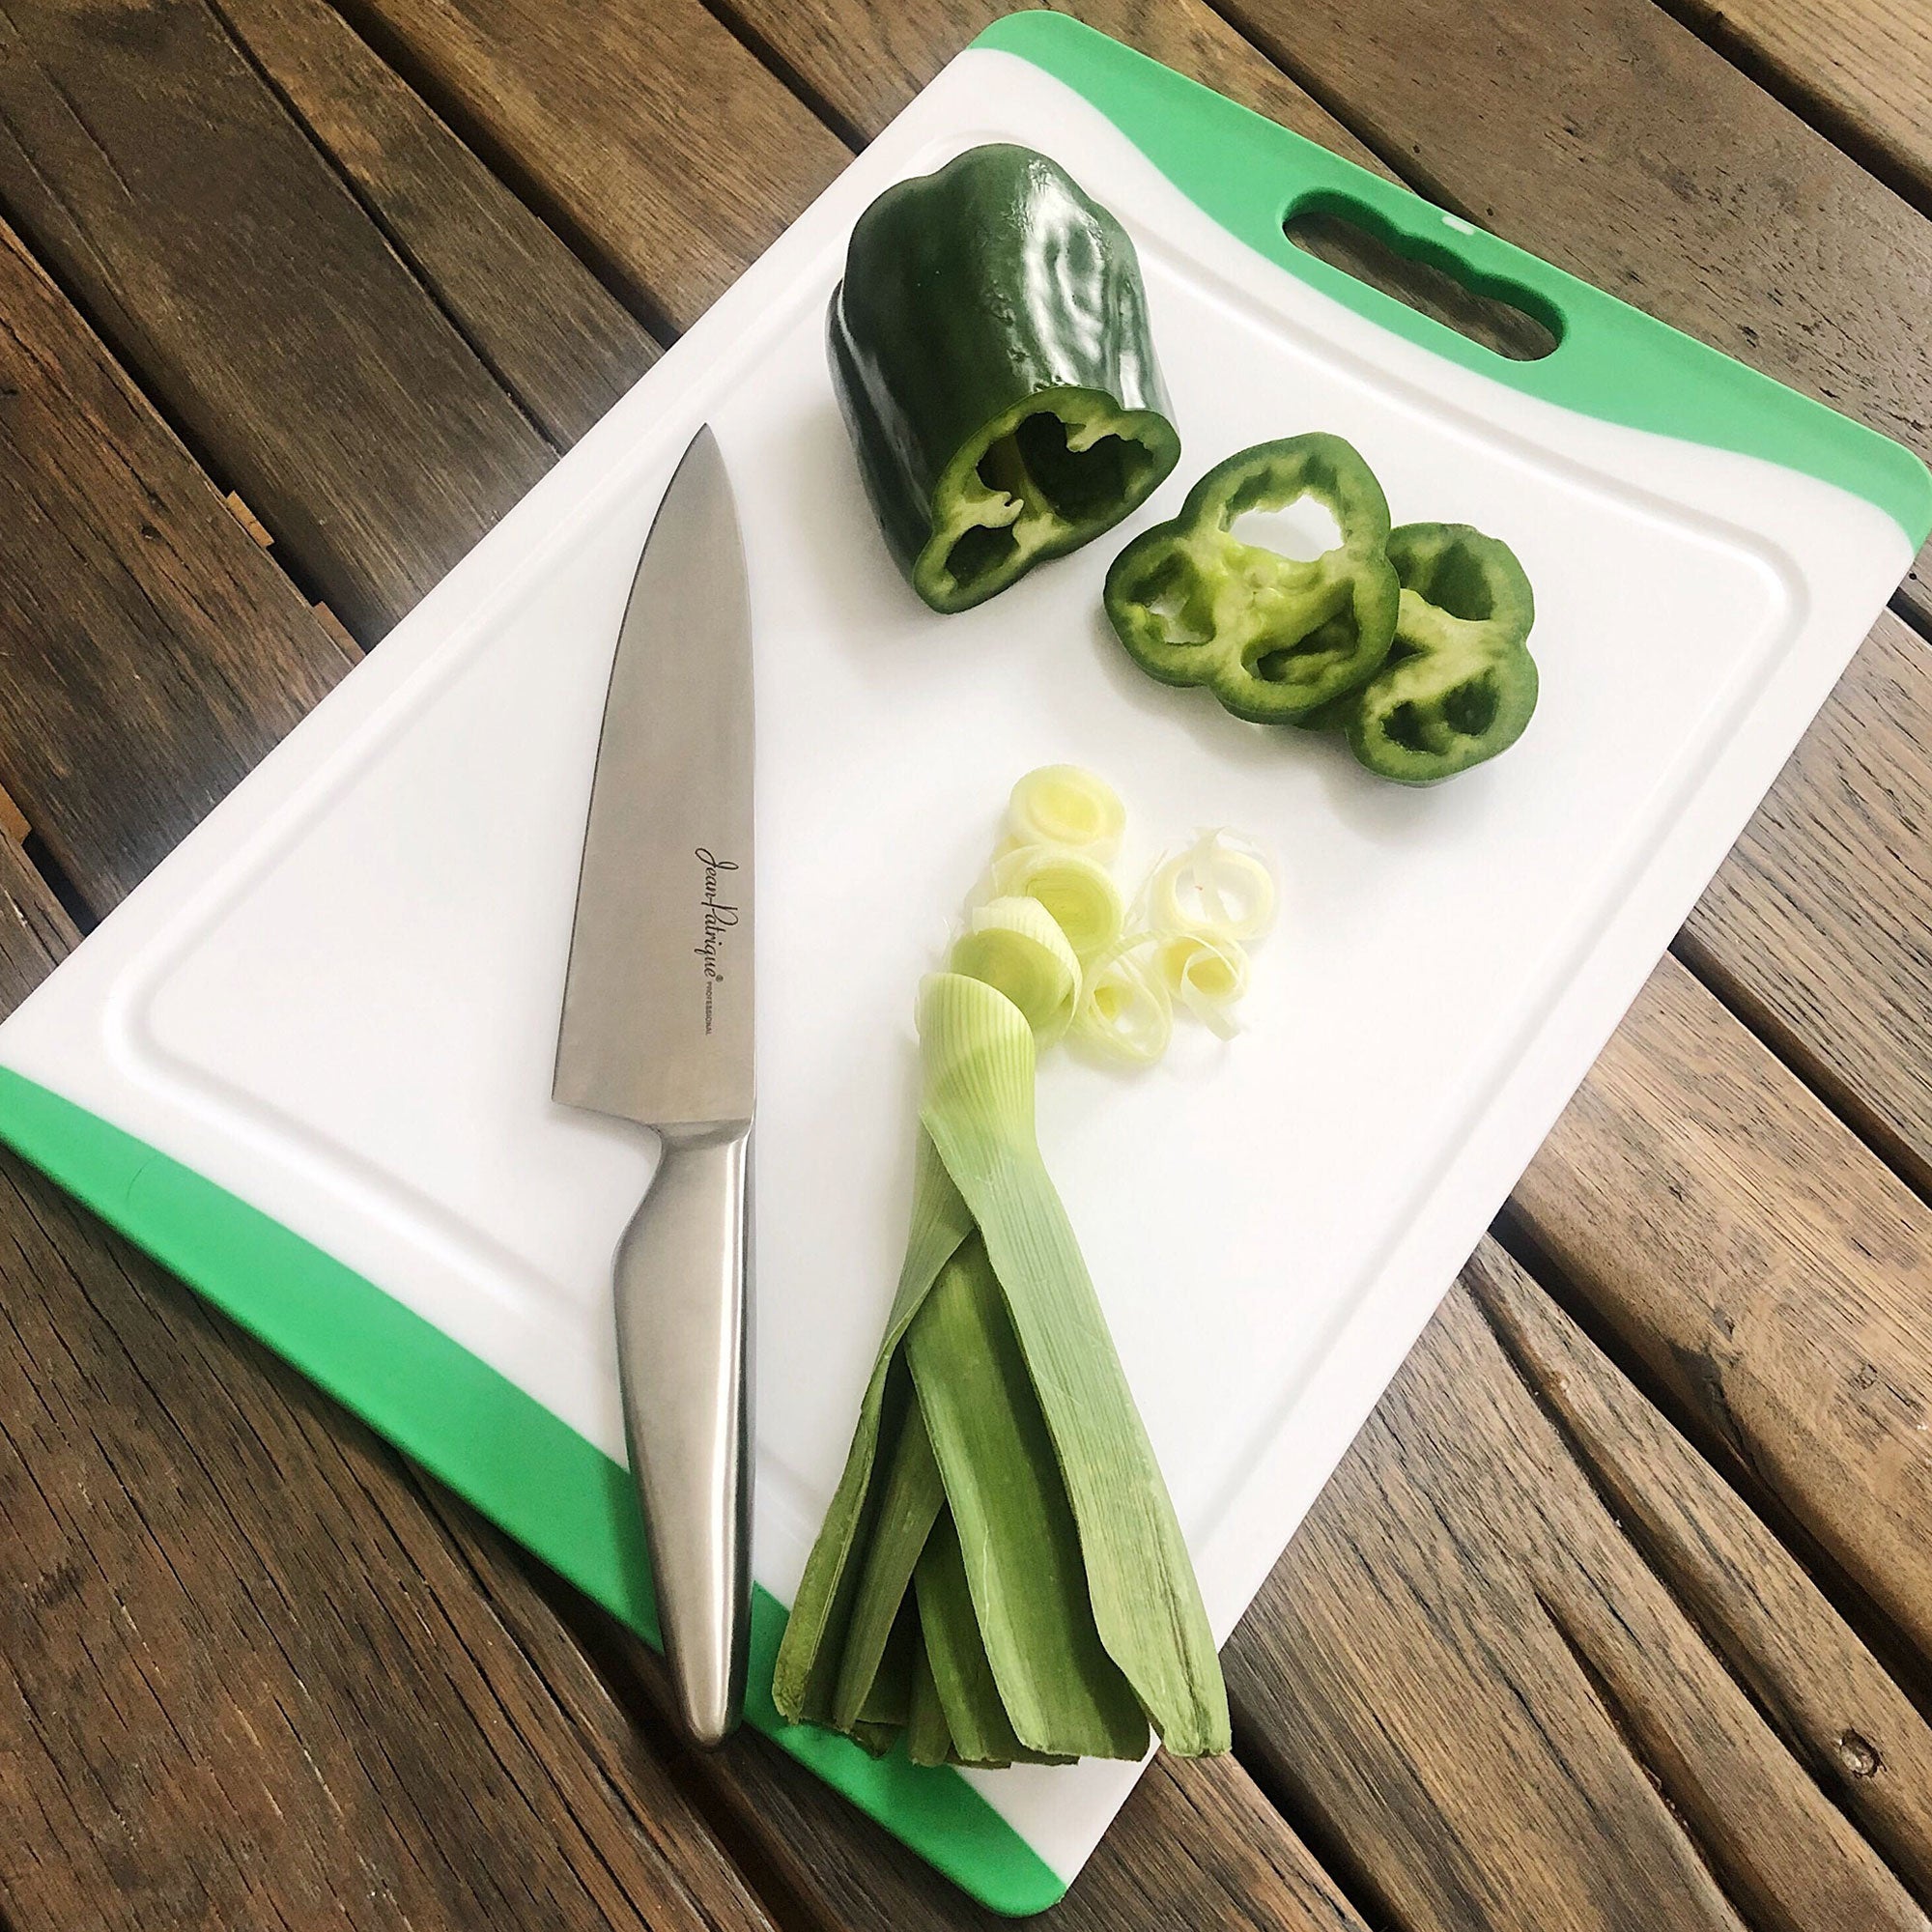 JoyJolt Plastic Cutting Board Set. White and Grey Cutting Boards for Kitchen Dishwasher Safe with Handle. Non Slip Large and Small Chopping Board